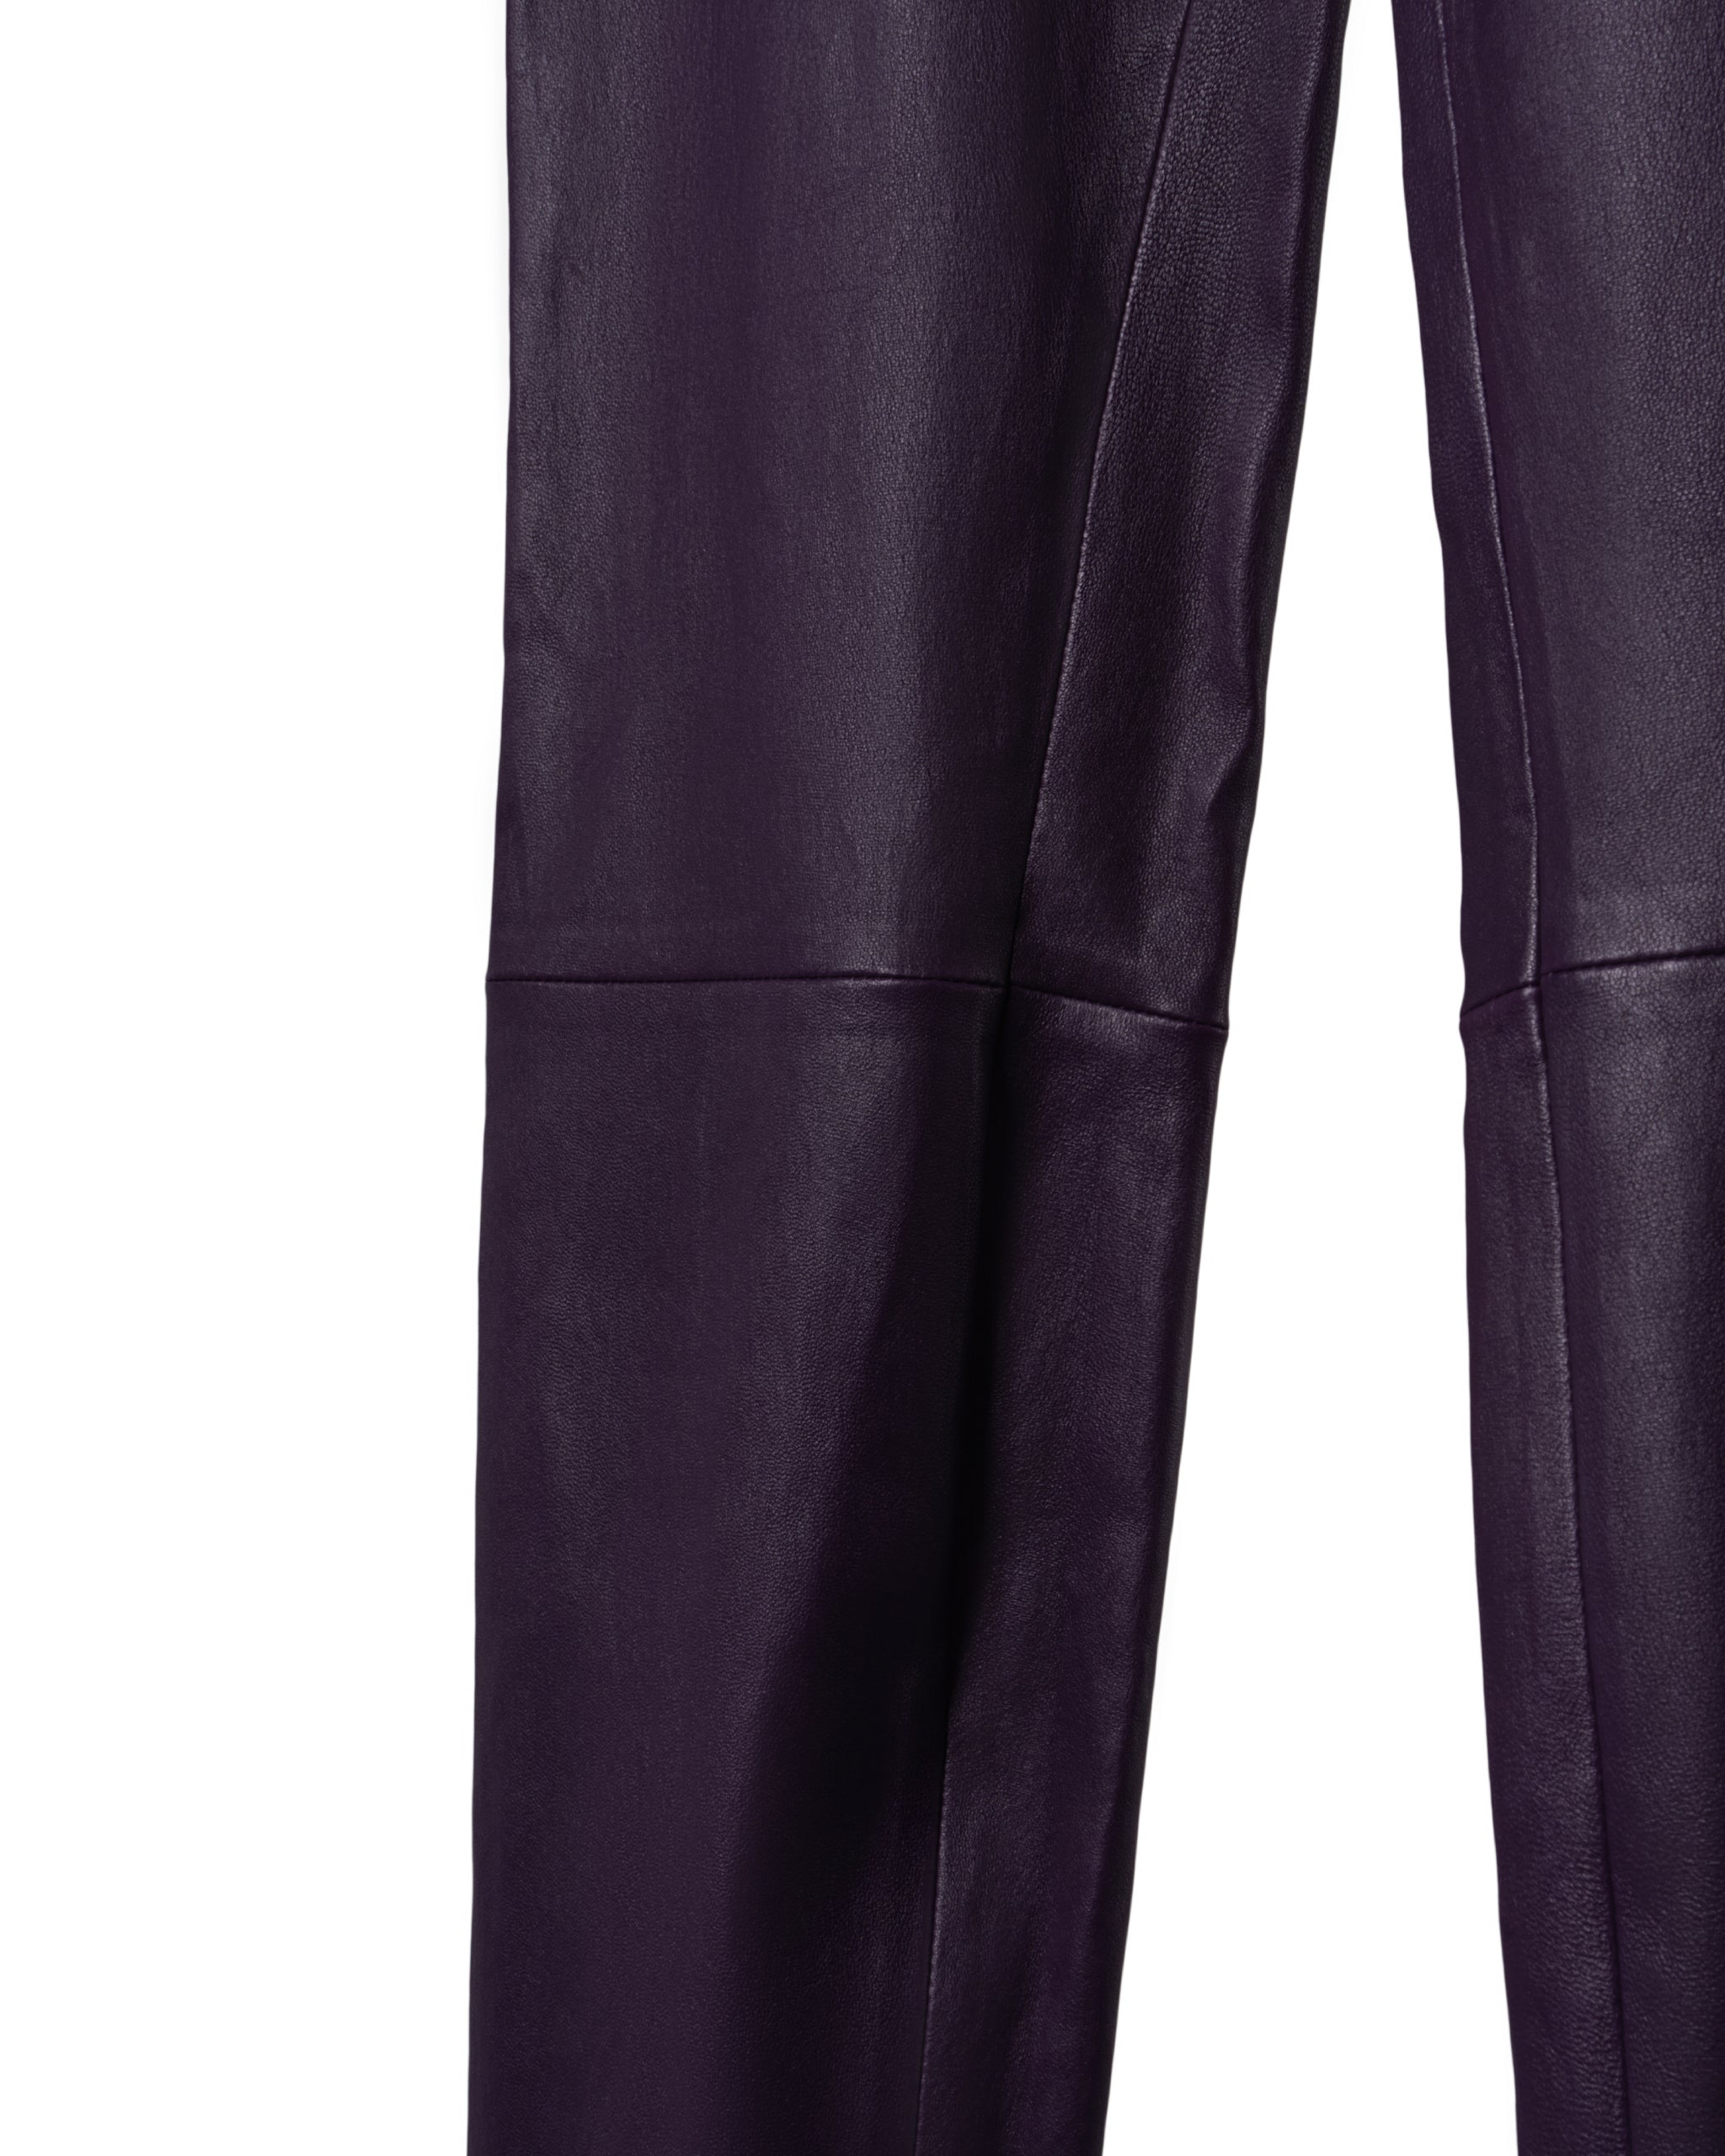 LOW RISE STRETCH LEATHER ZIP LEGGING